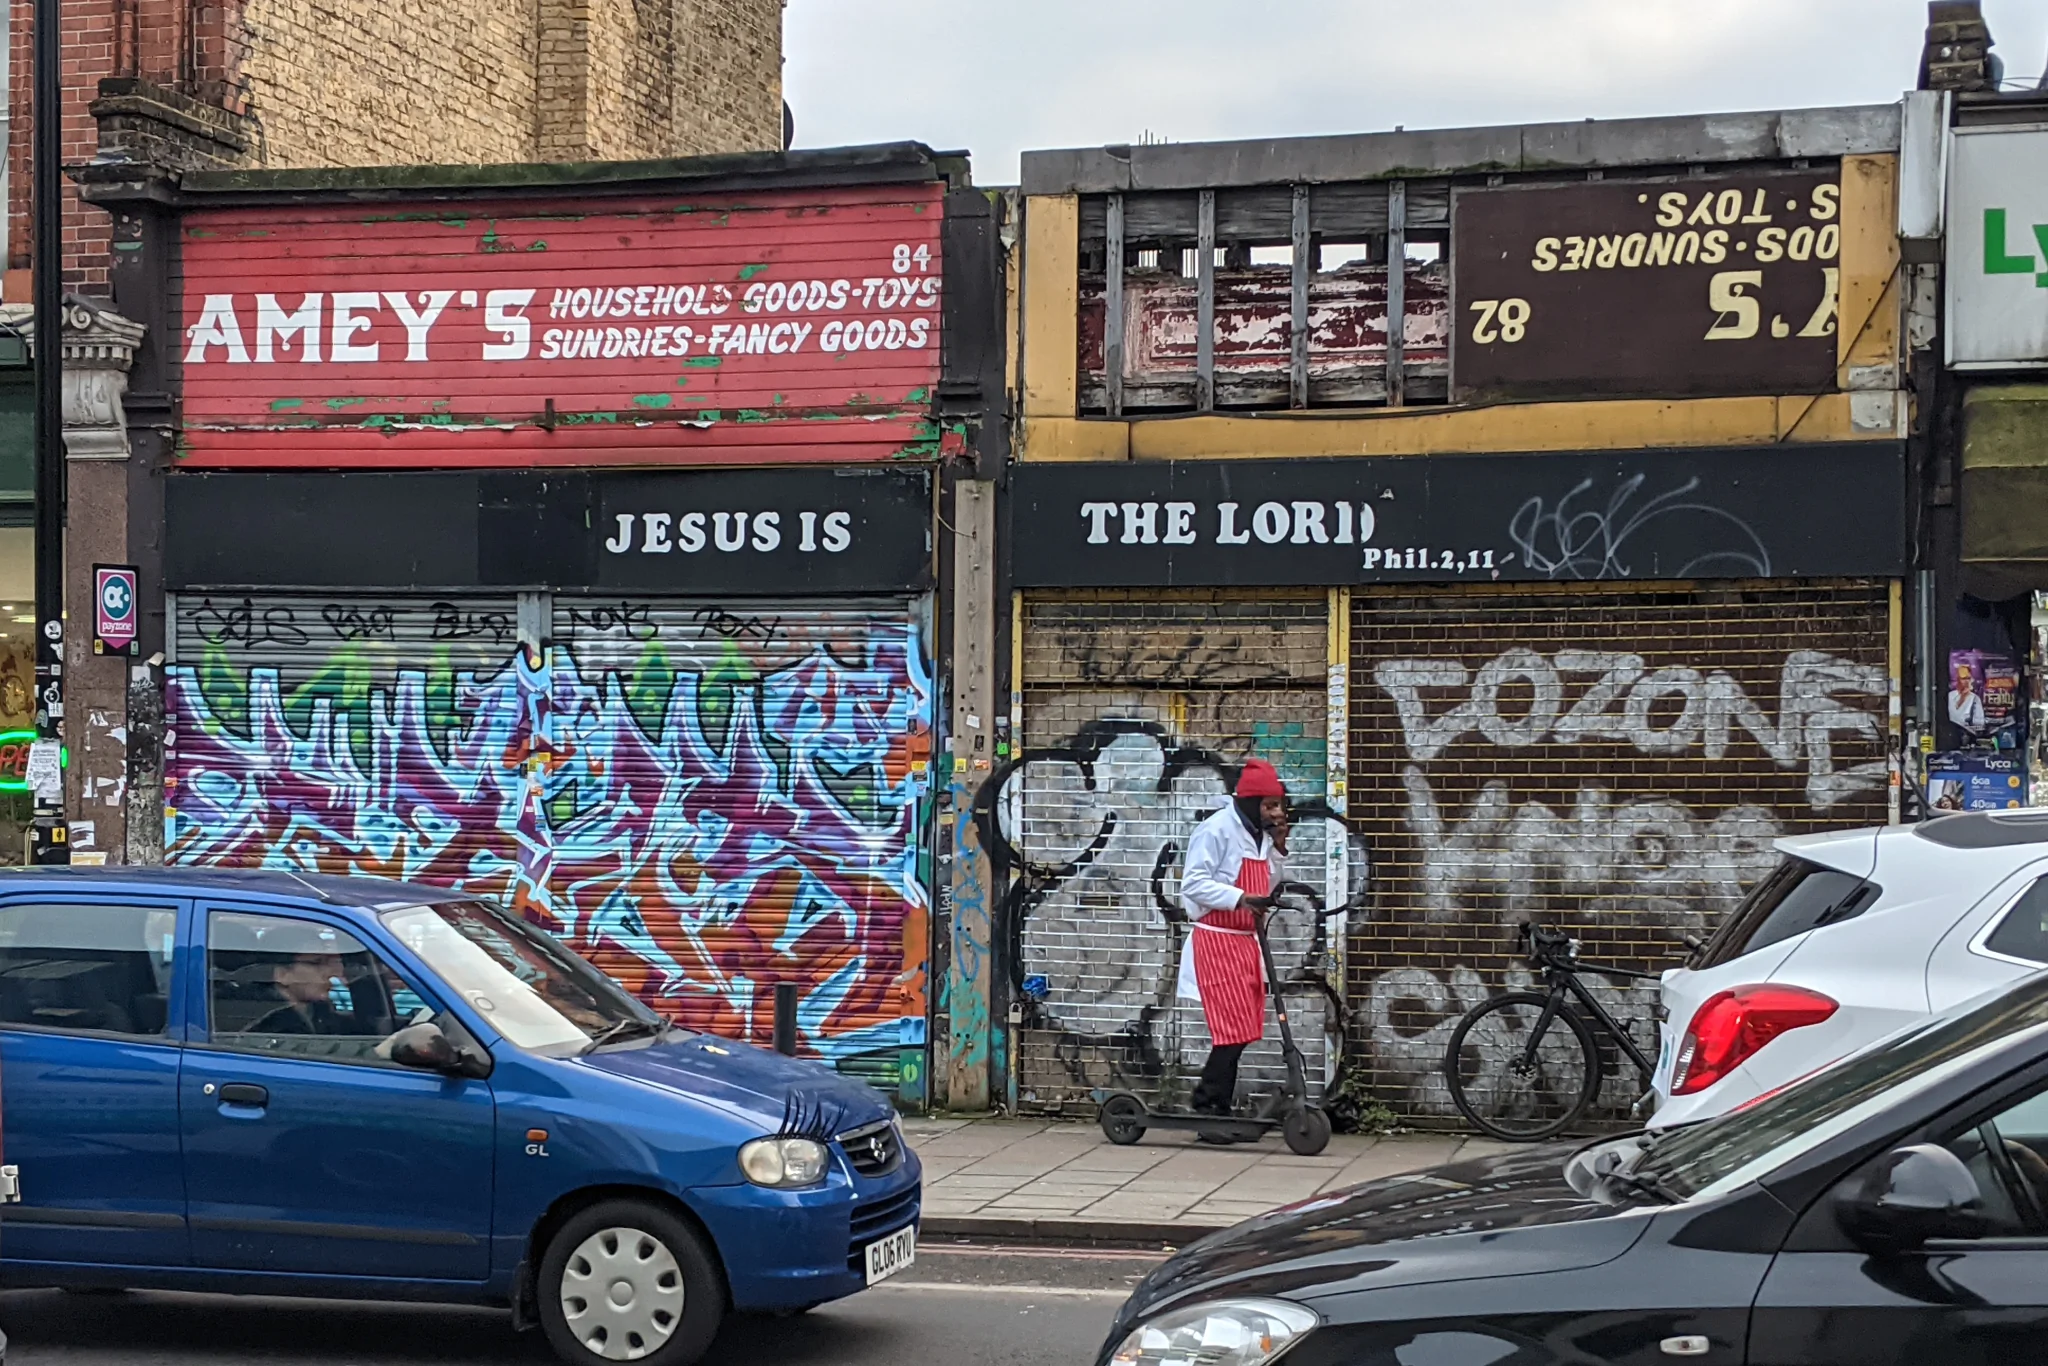 On the far side of the road, beyond passing cars, is a shuttered shop.
It's covered with graffiti, and the remnants of an old sign are visible.
Directly above the frontage is a newer sign, reading JESUS IS THE LORD.
Someone in a red hat and apron is trundling along the pavement on a scooter.